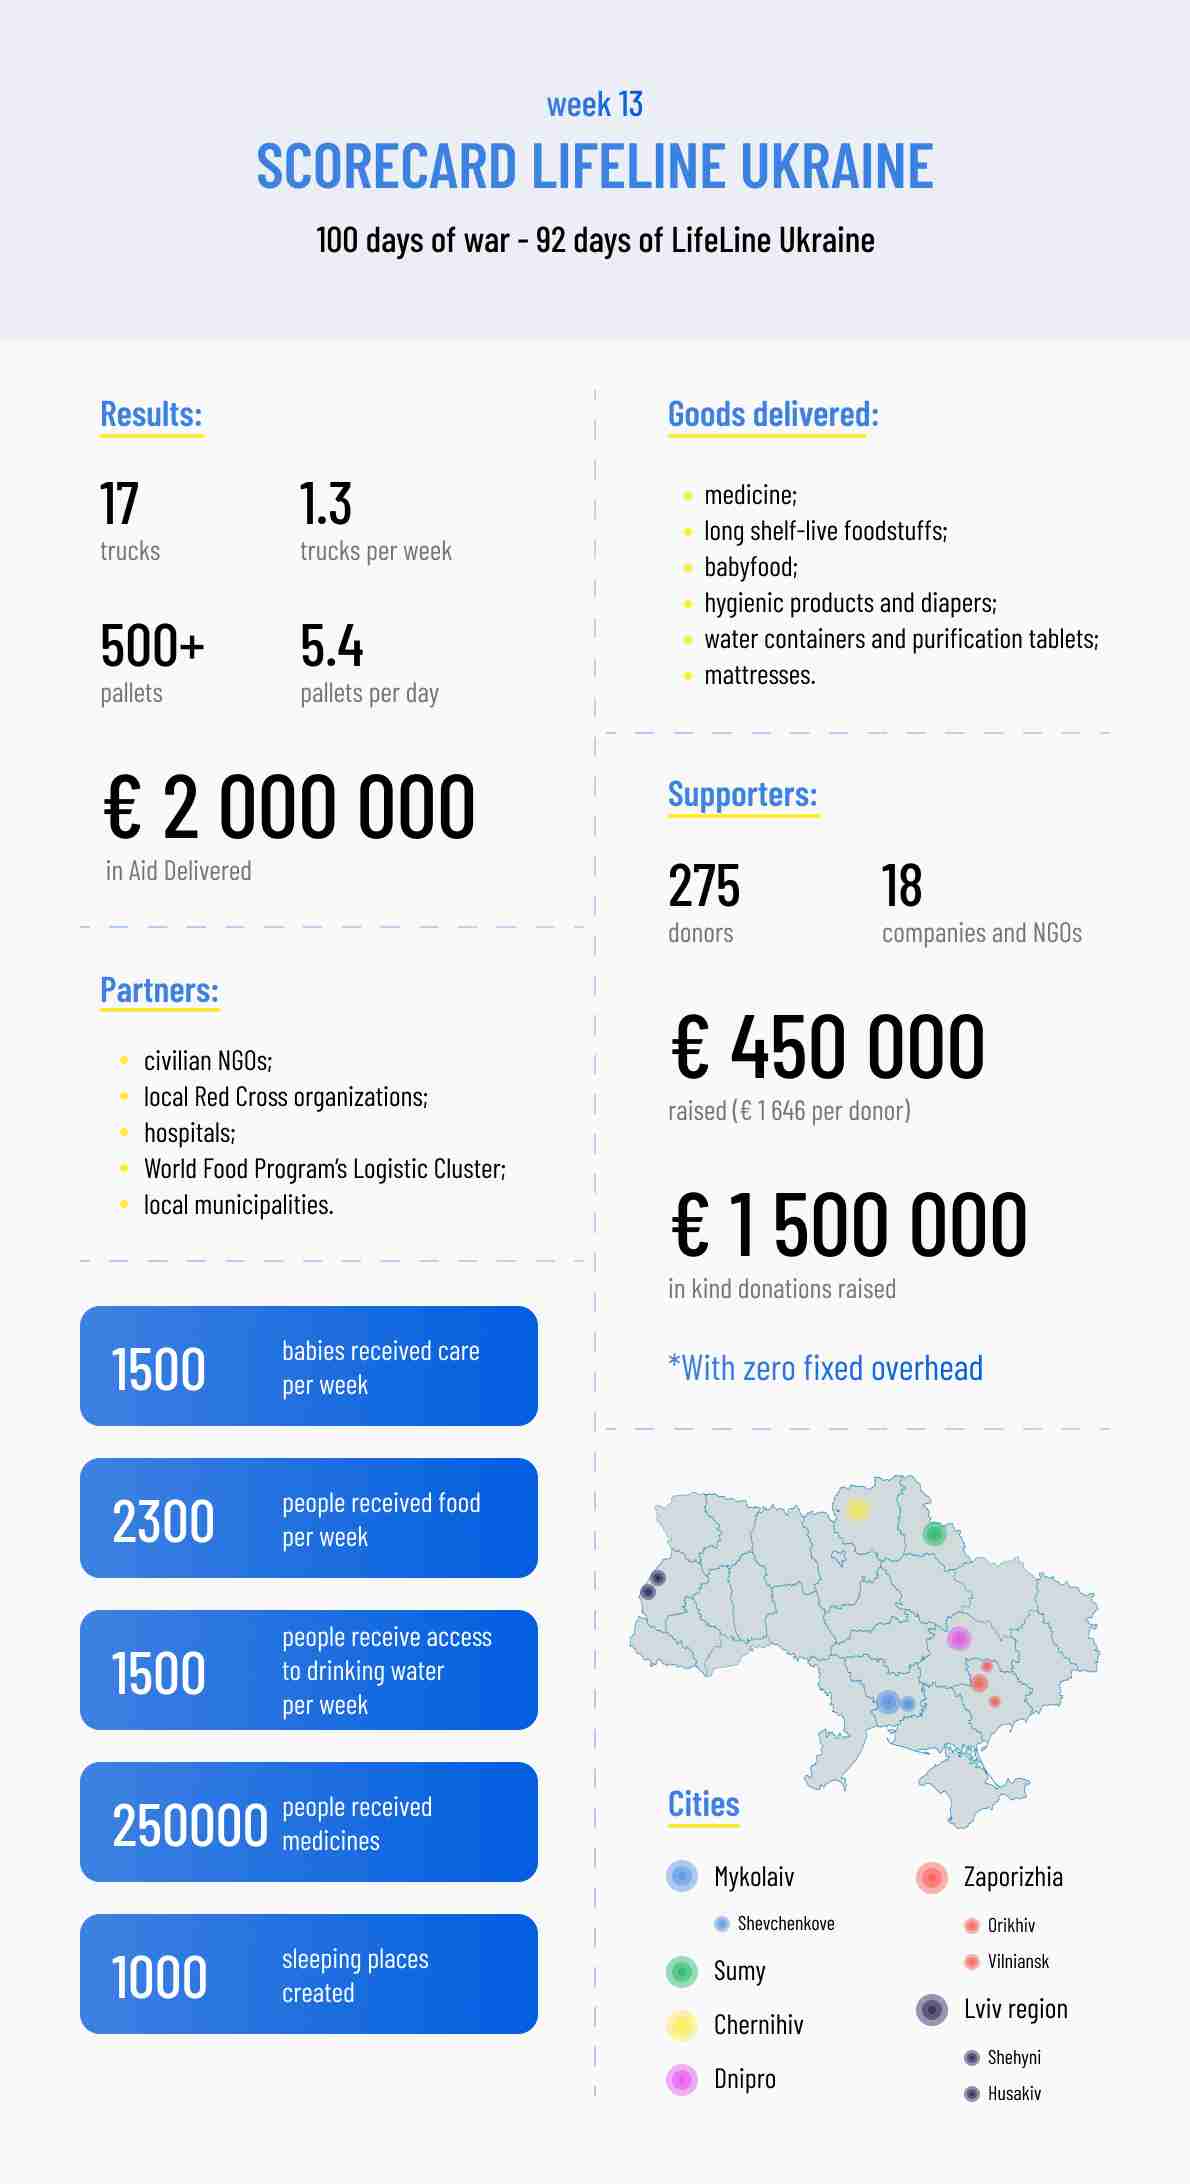 Our weekly Scorecard with the status and results for week 13 of LifeLine Ukraine.